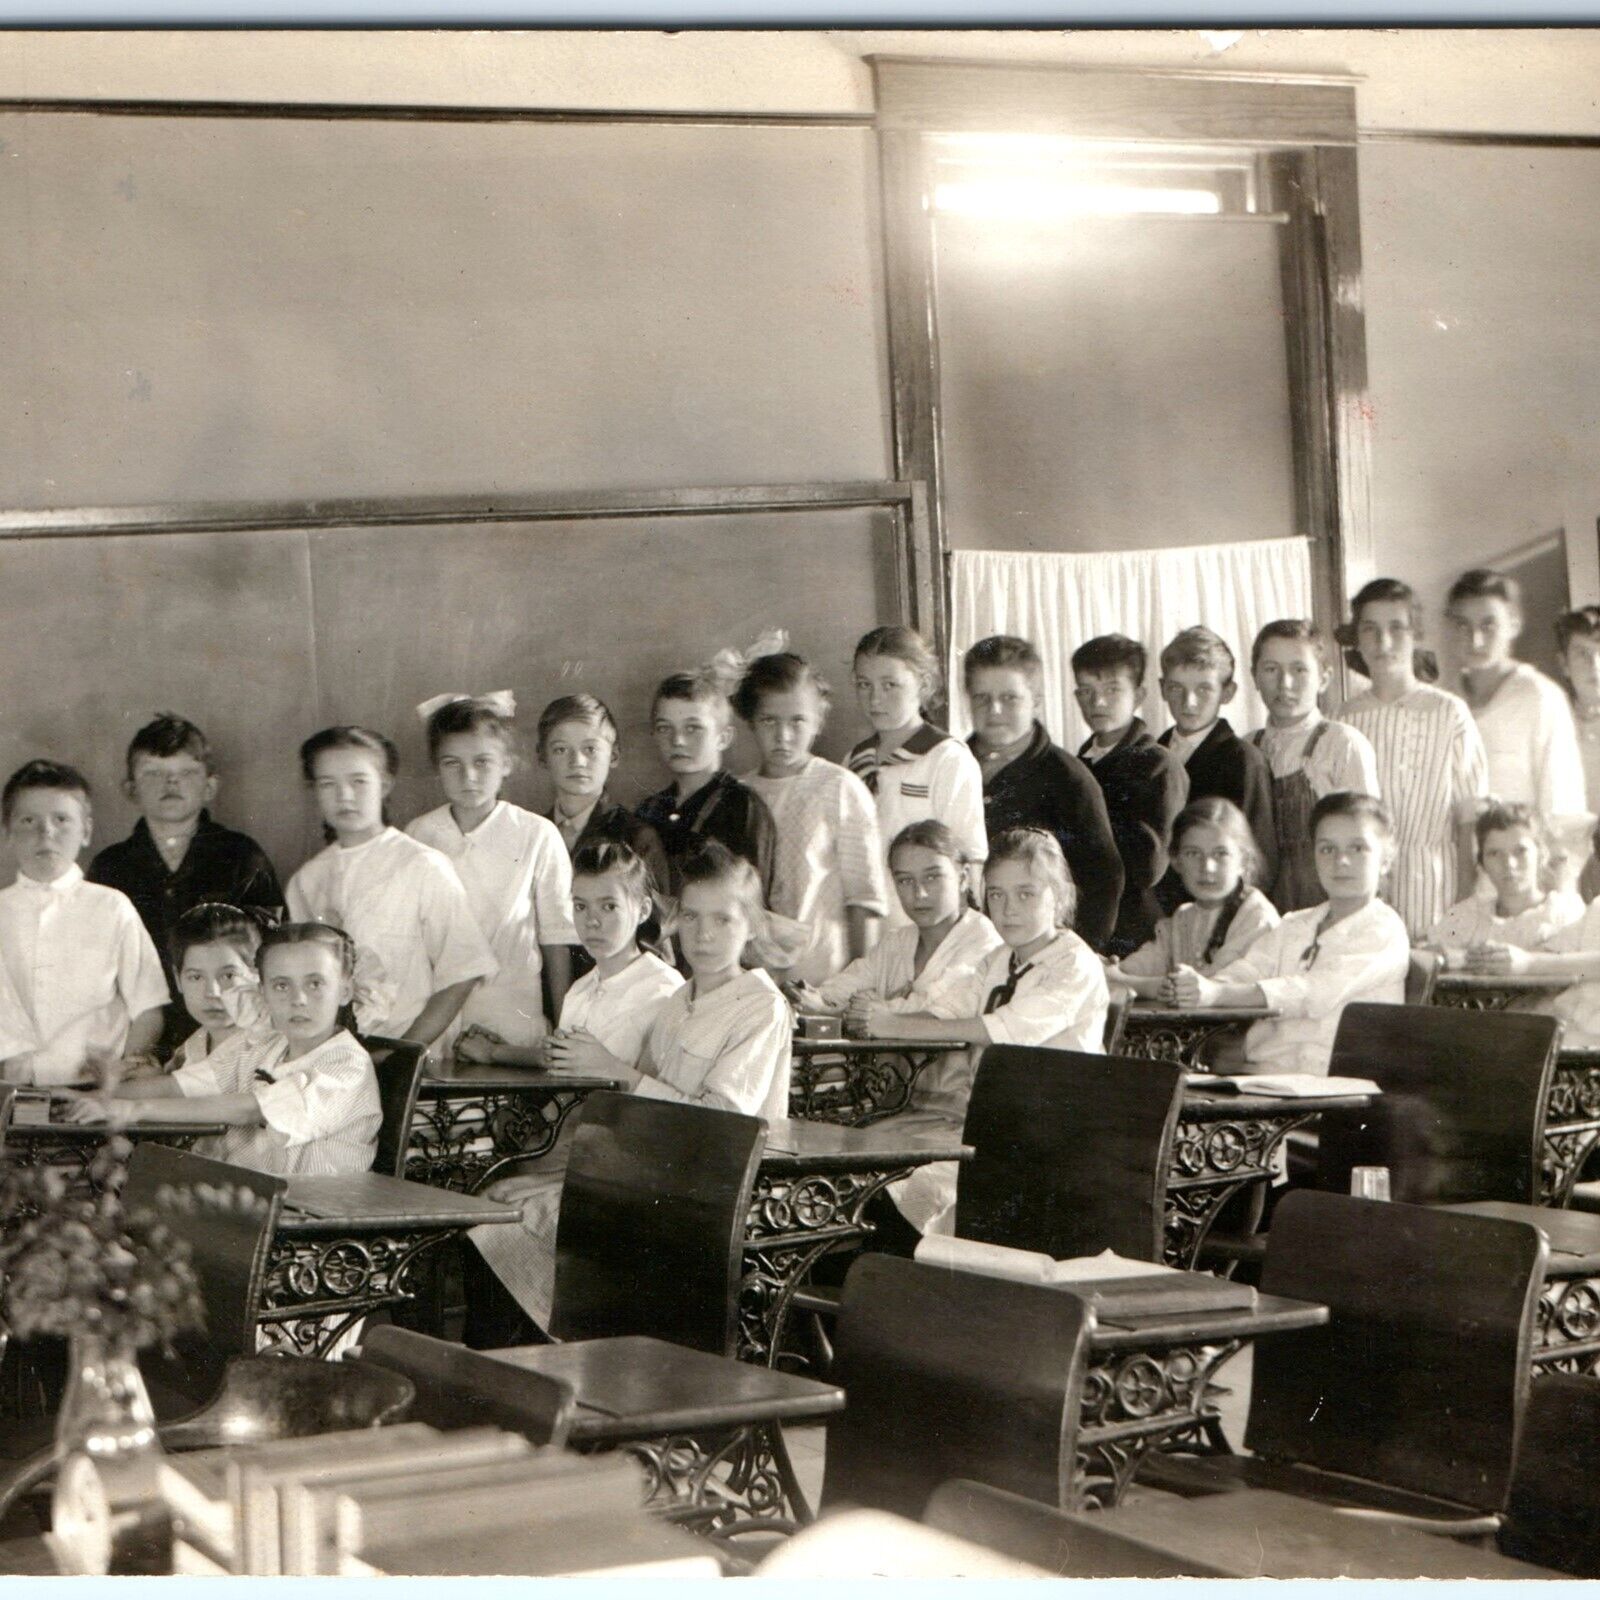 c1910s School Classroom Students Group RPPC Ornate Cast Desk Real Photo A147